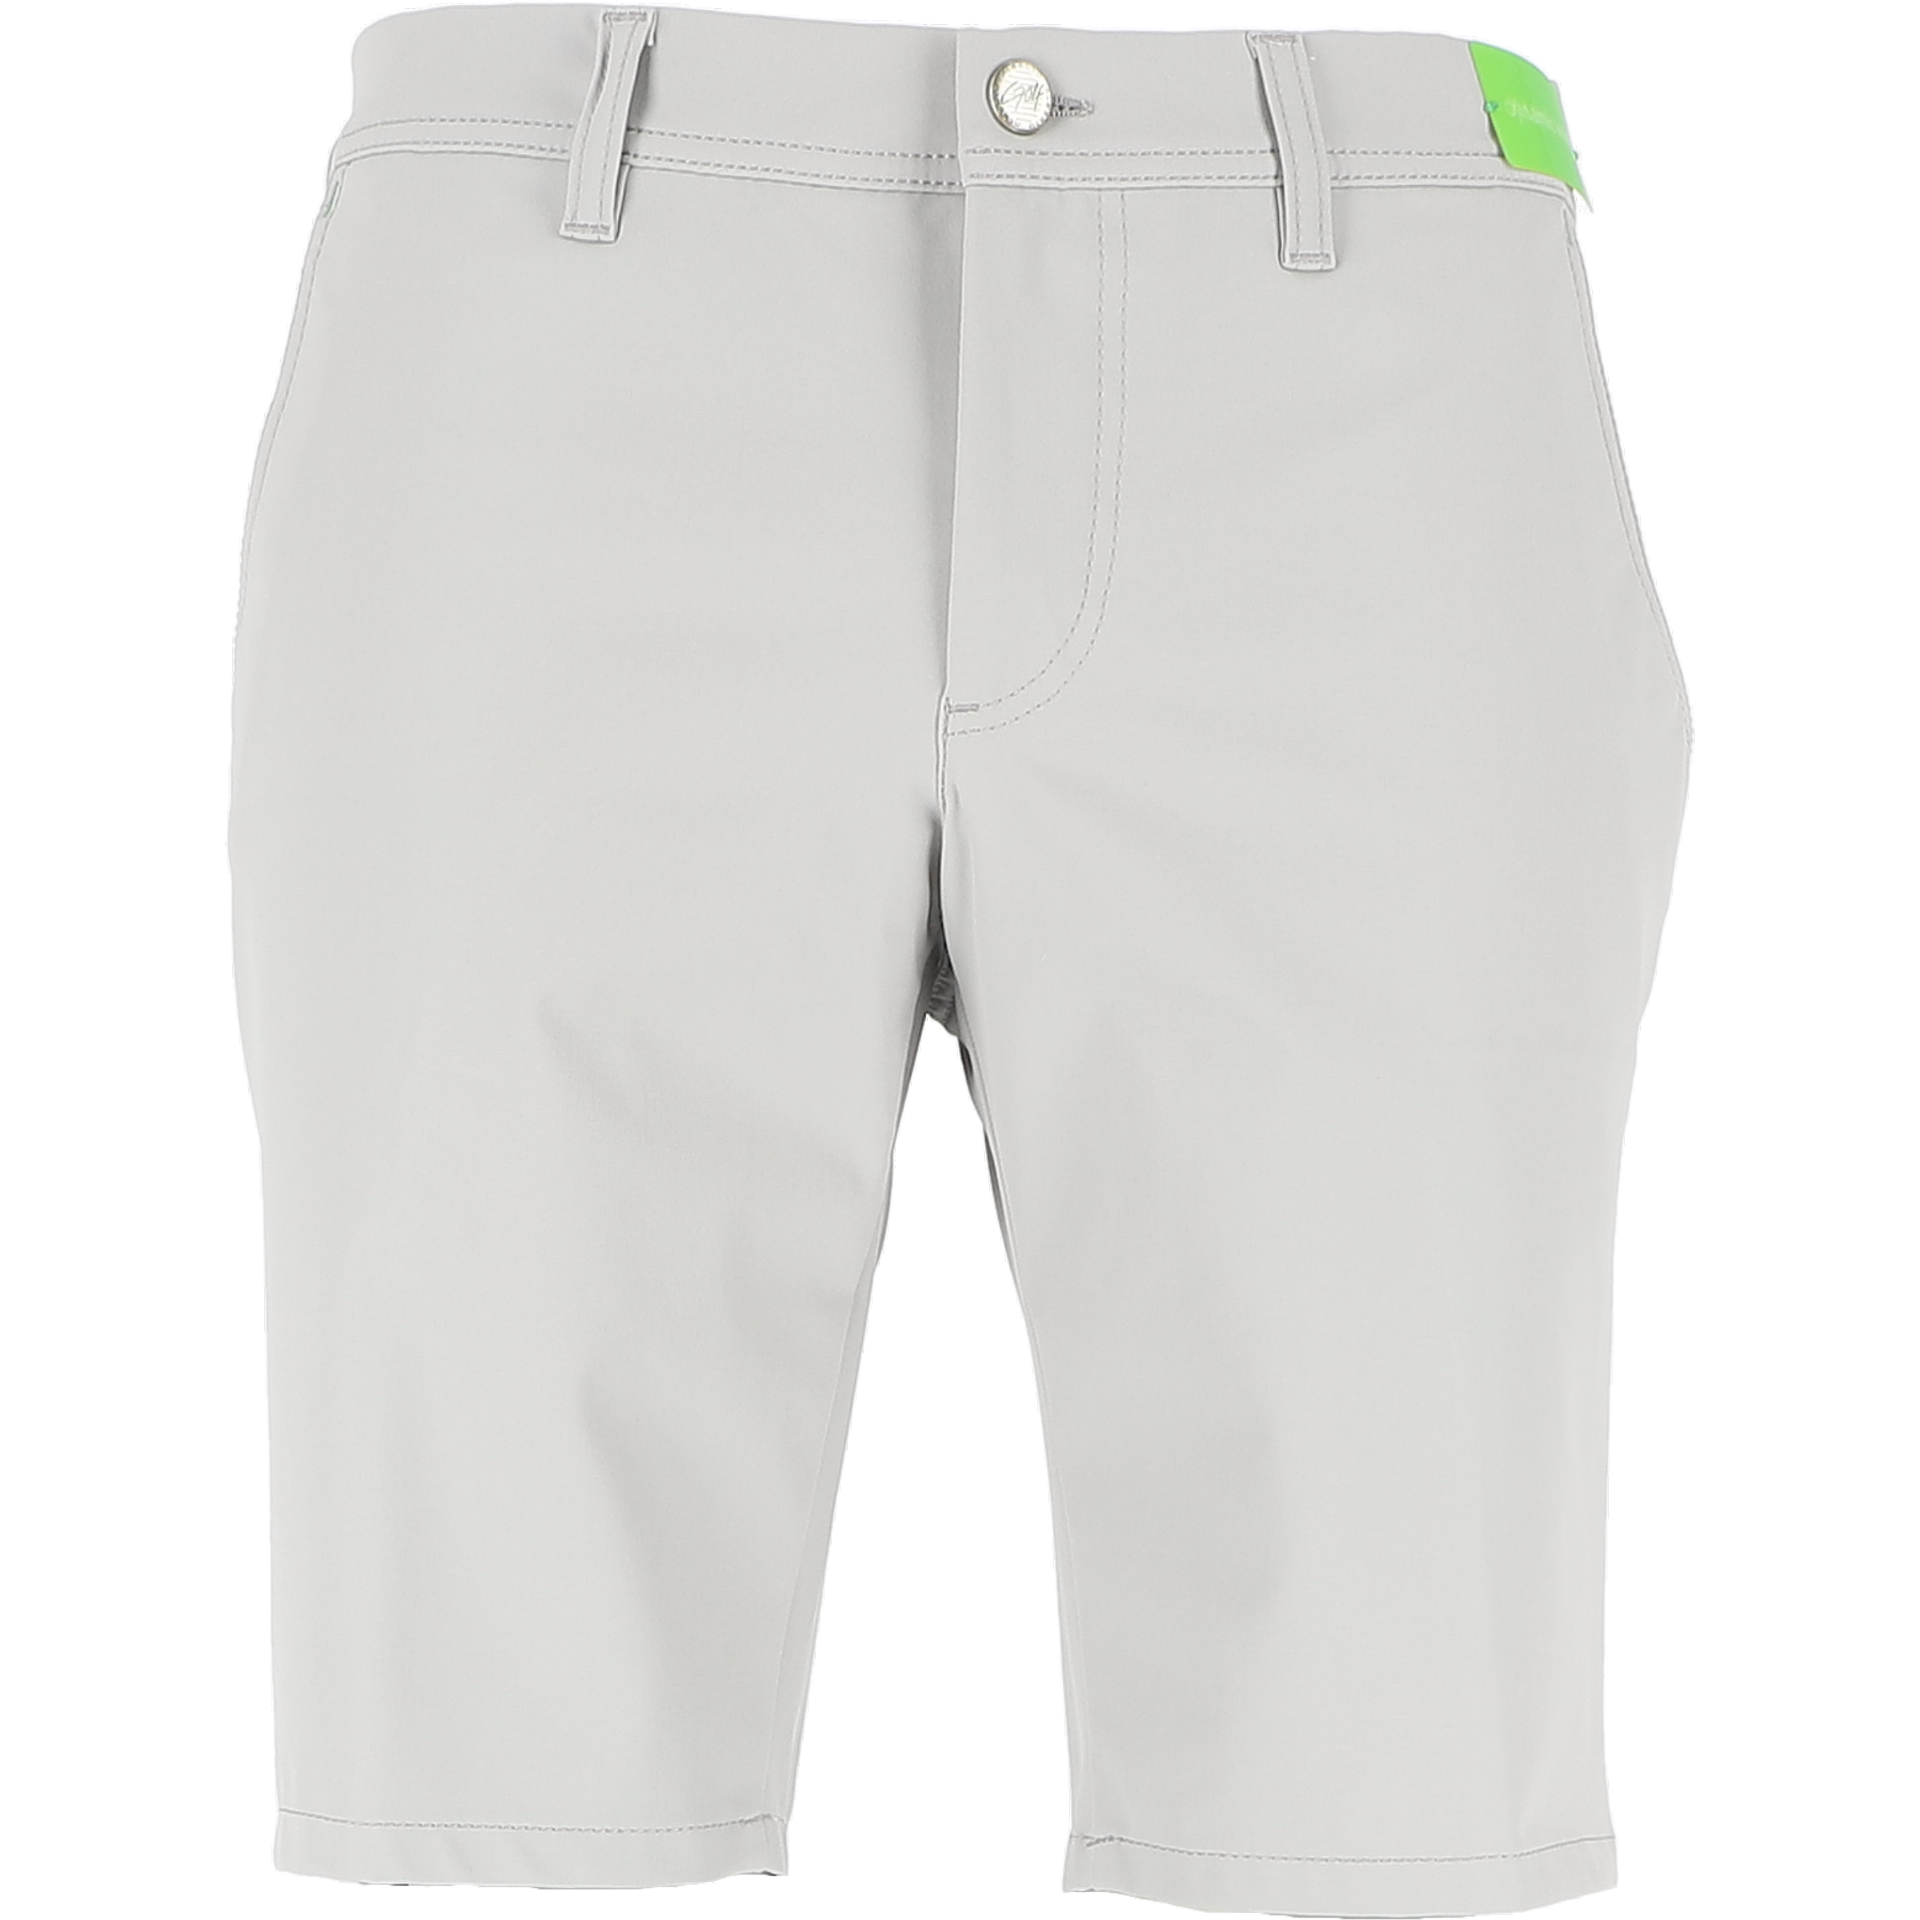 EARNIE Shorts - 3xDRY Cooler